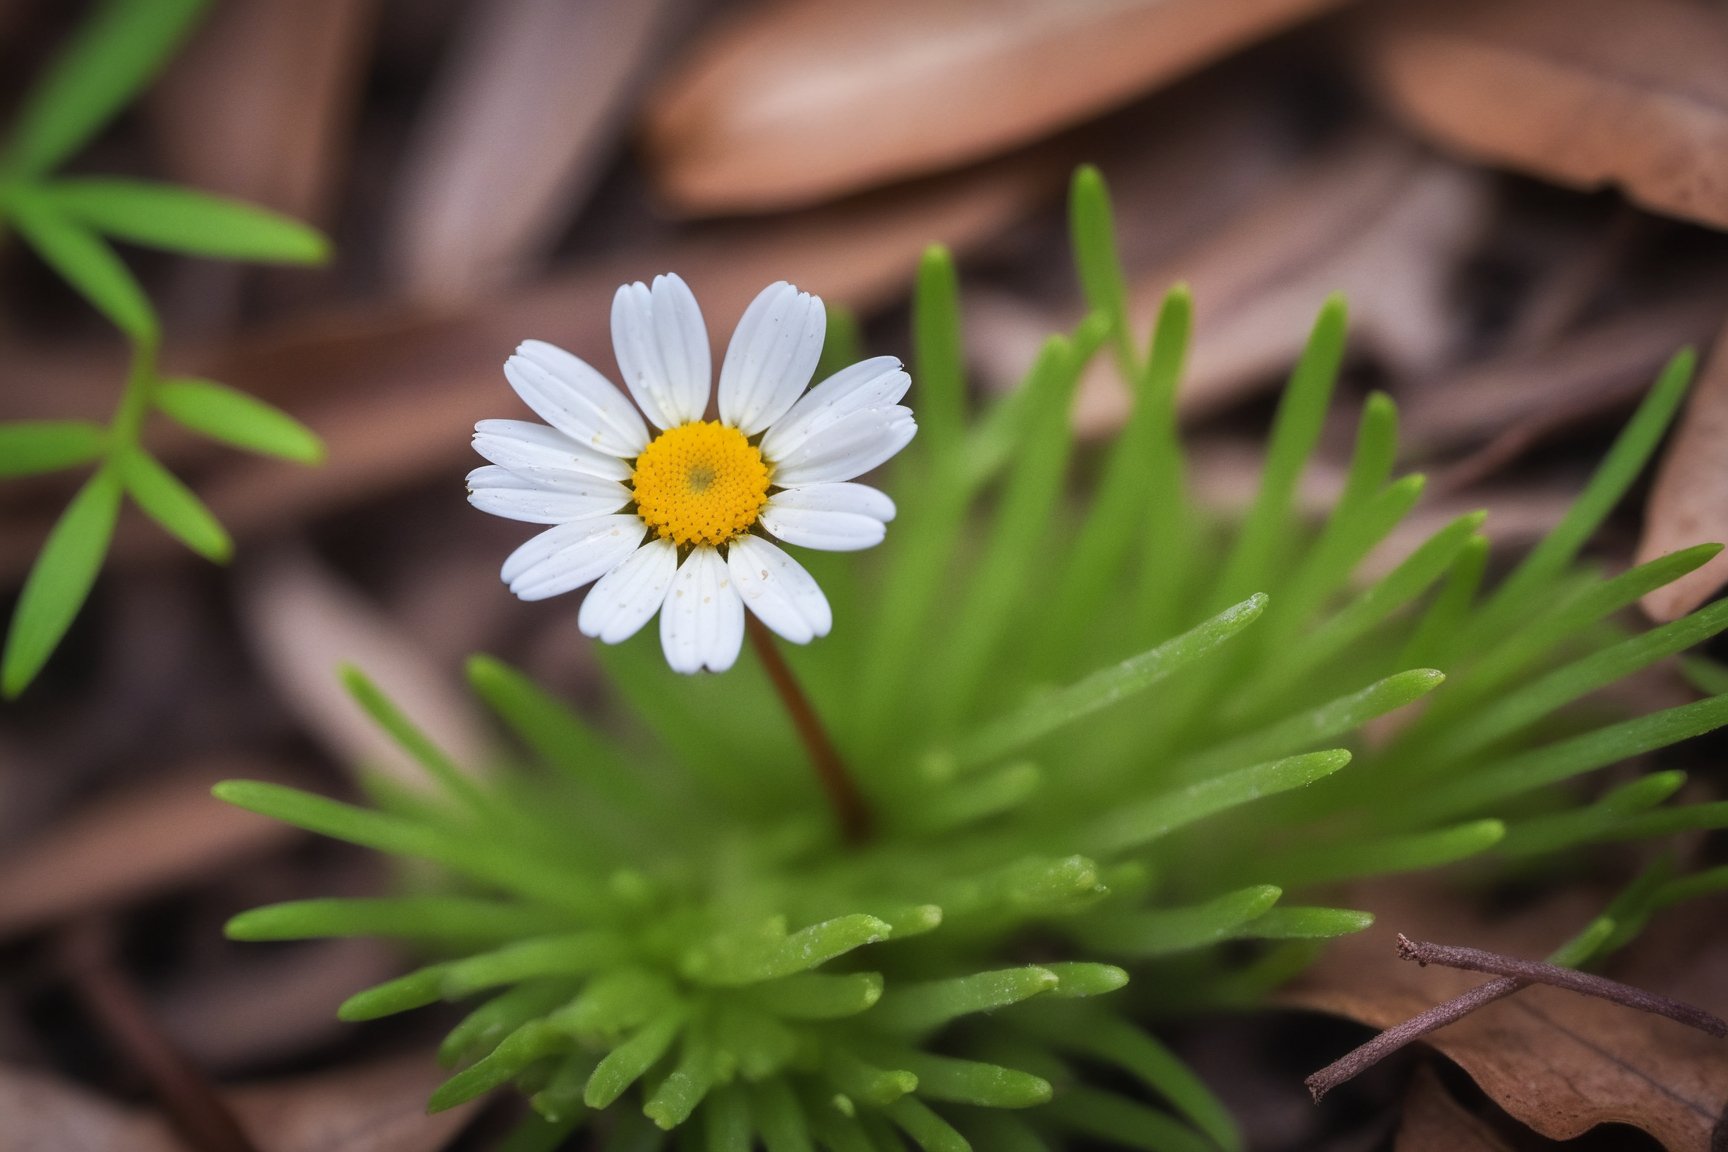 a perfect closeup photo of a tiny daisy flower on the overgrown forest floor
,Enhanced Reality